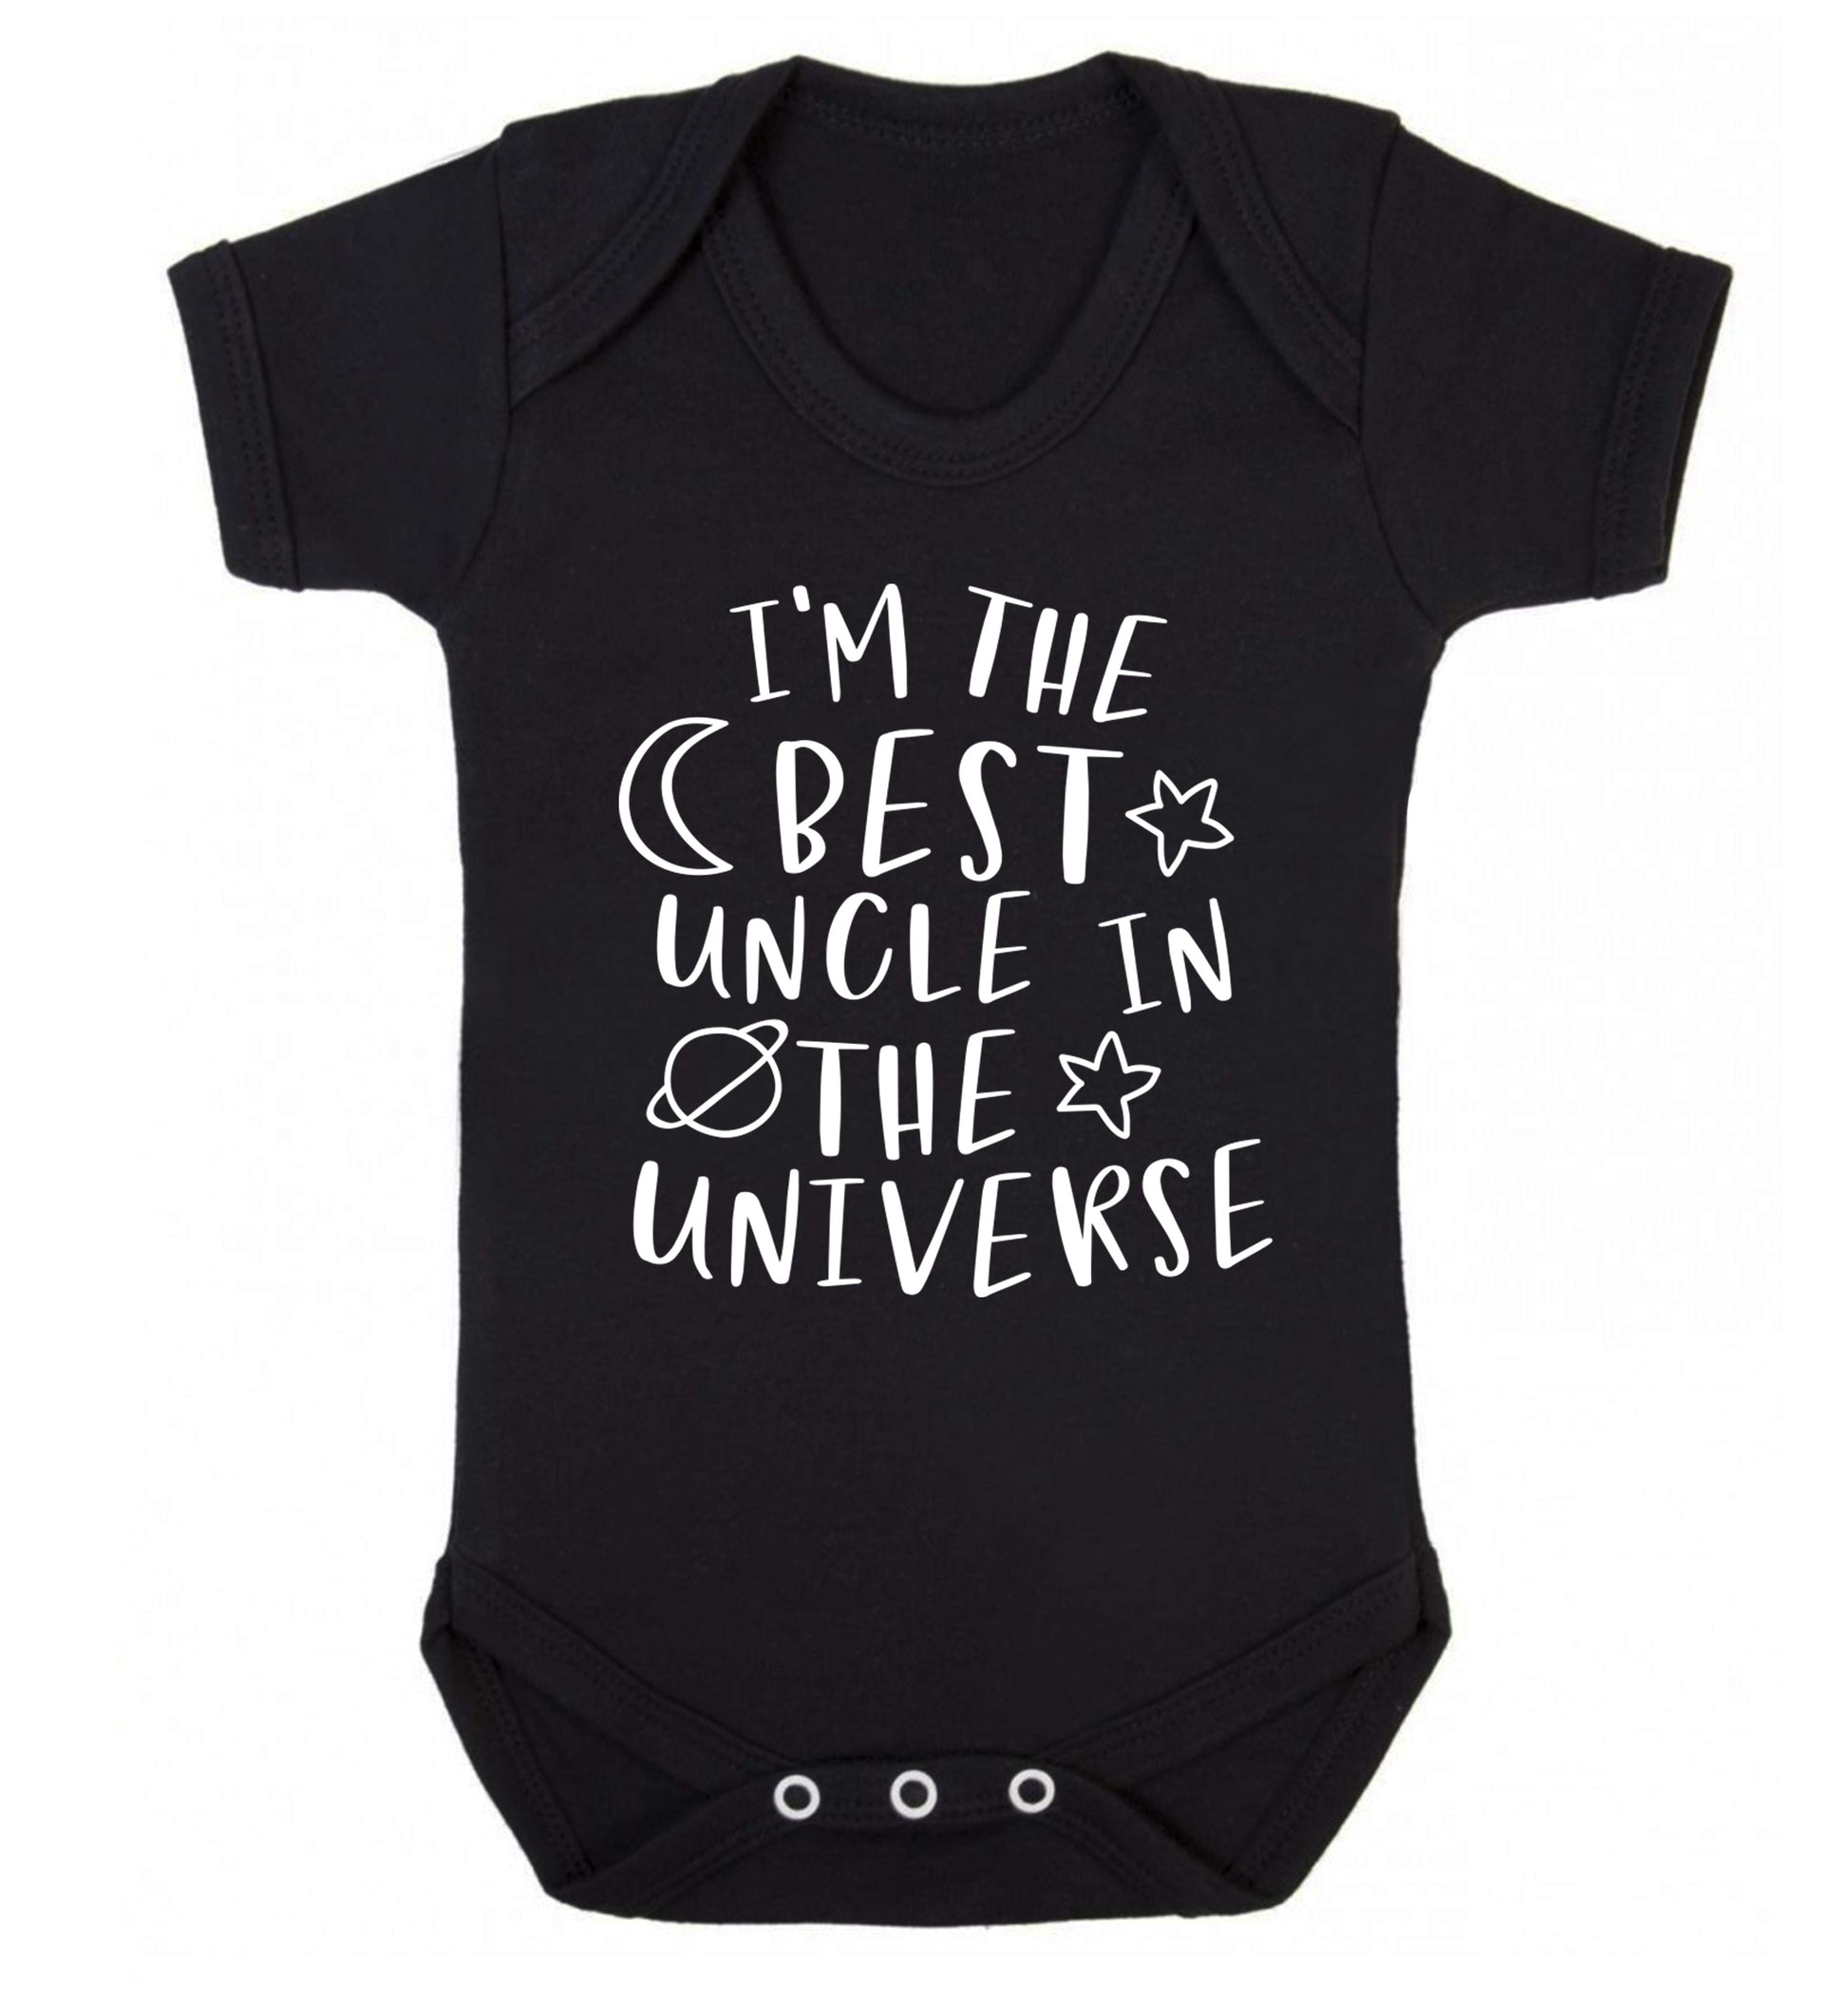 I'm the best uncle in the universe Baby Vest black 18-24 months